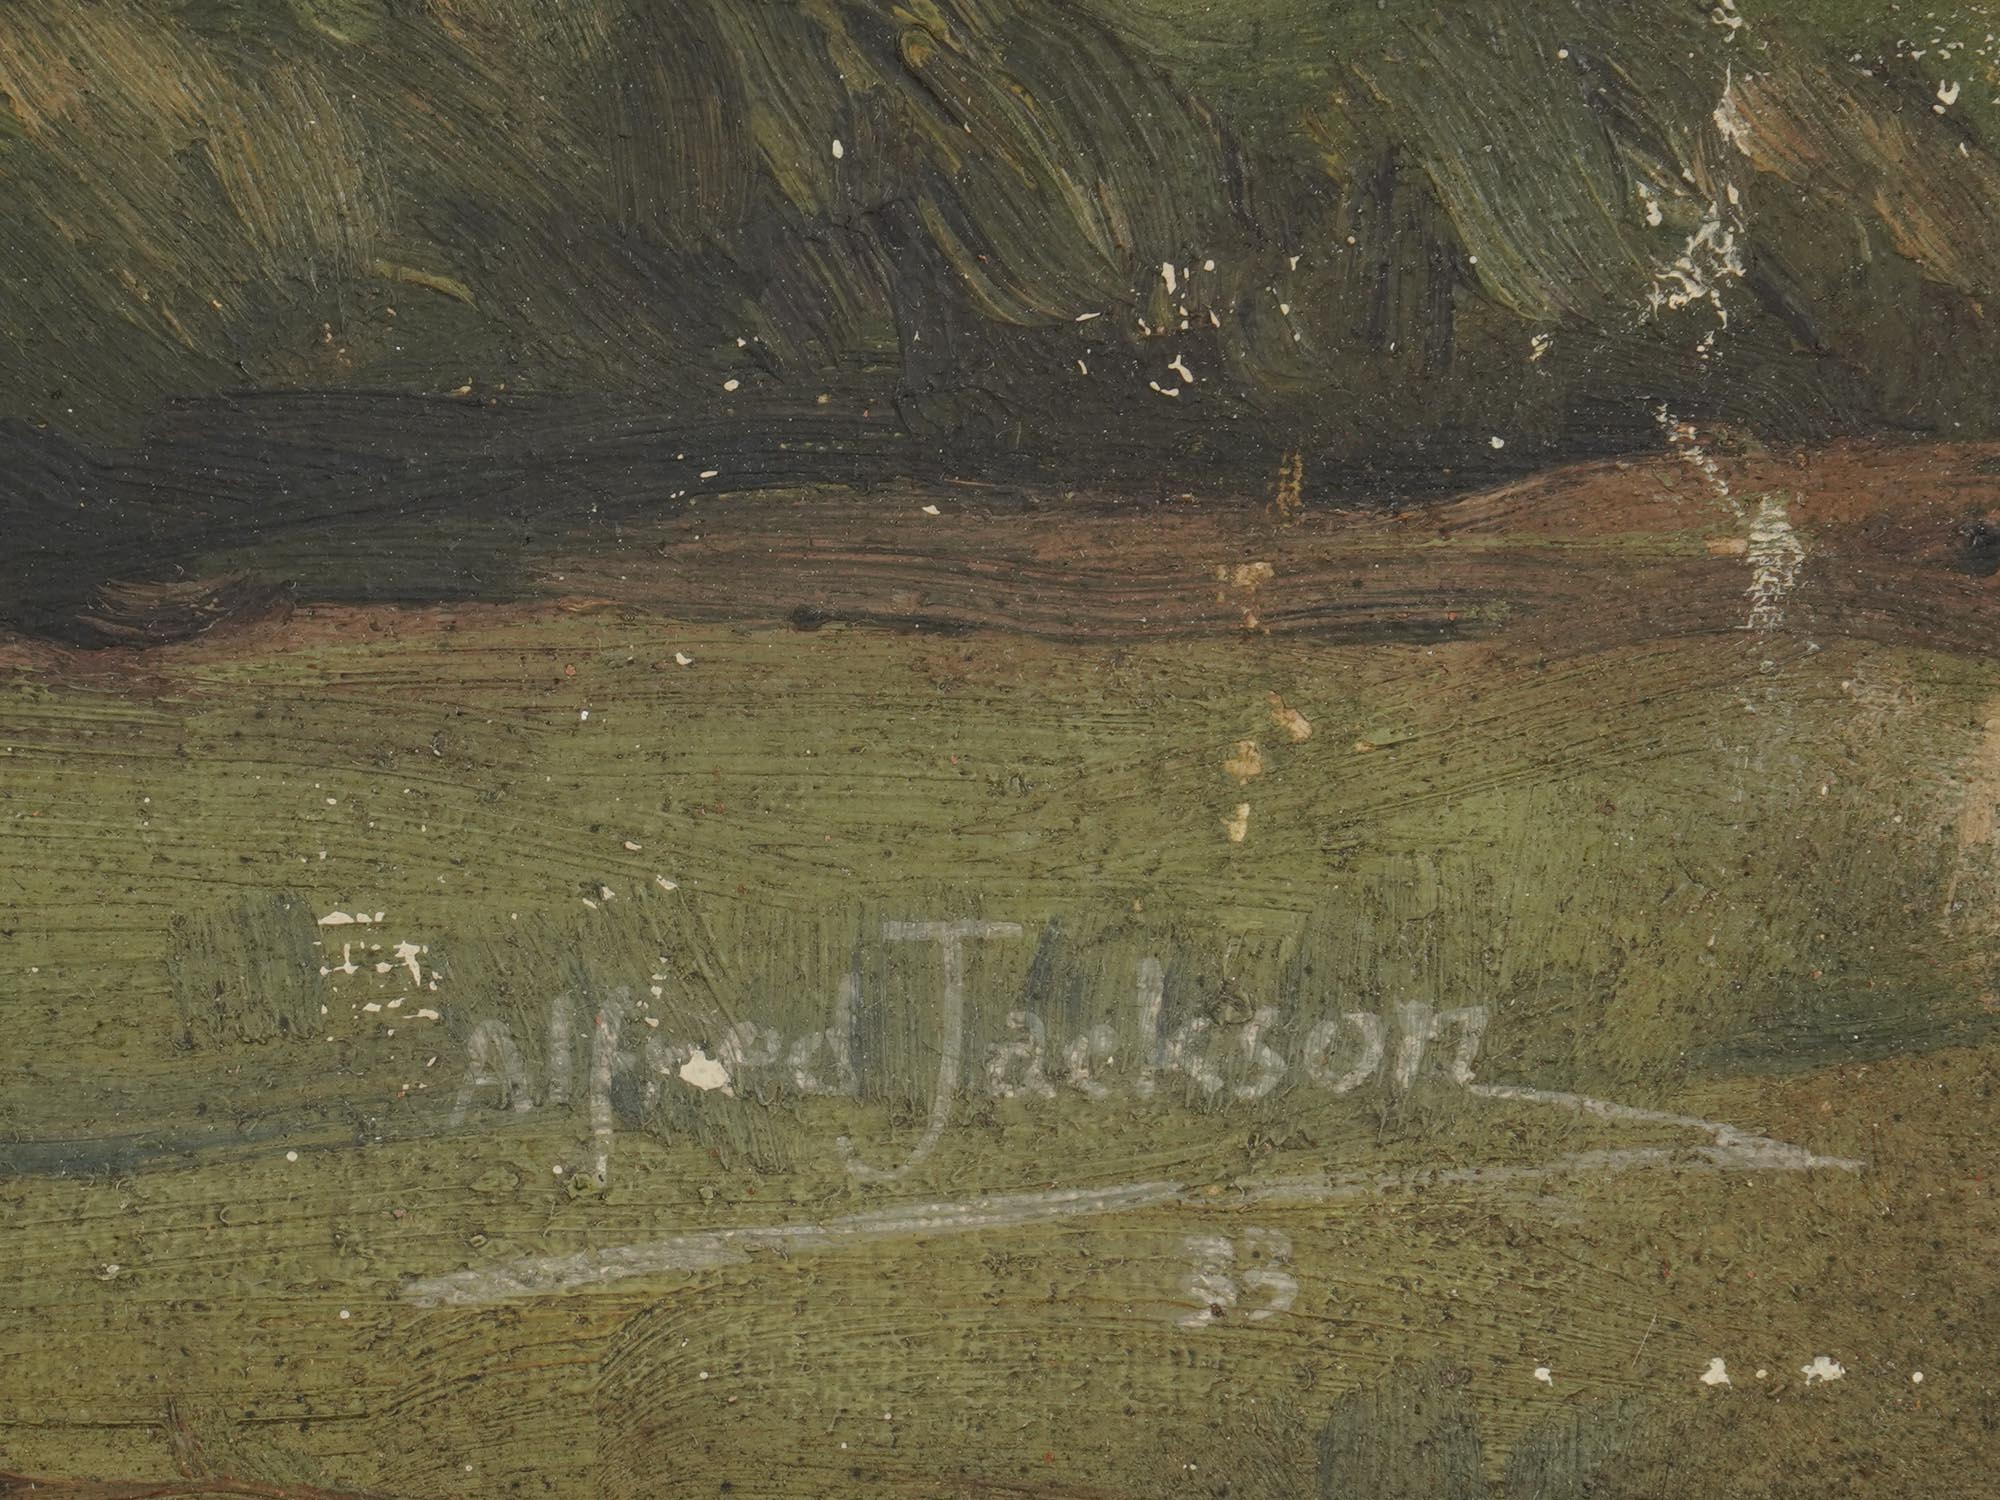 AMERICAN LANDSCAPE PAINTING BY ALFRED JACKSON PIC-3